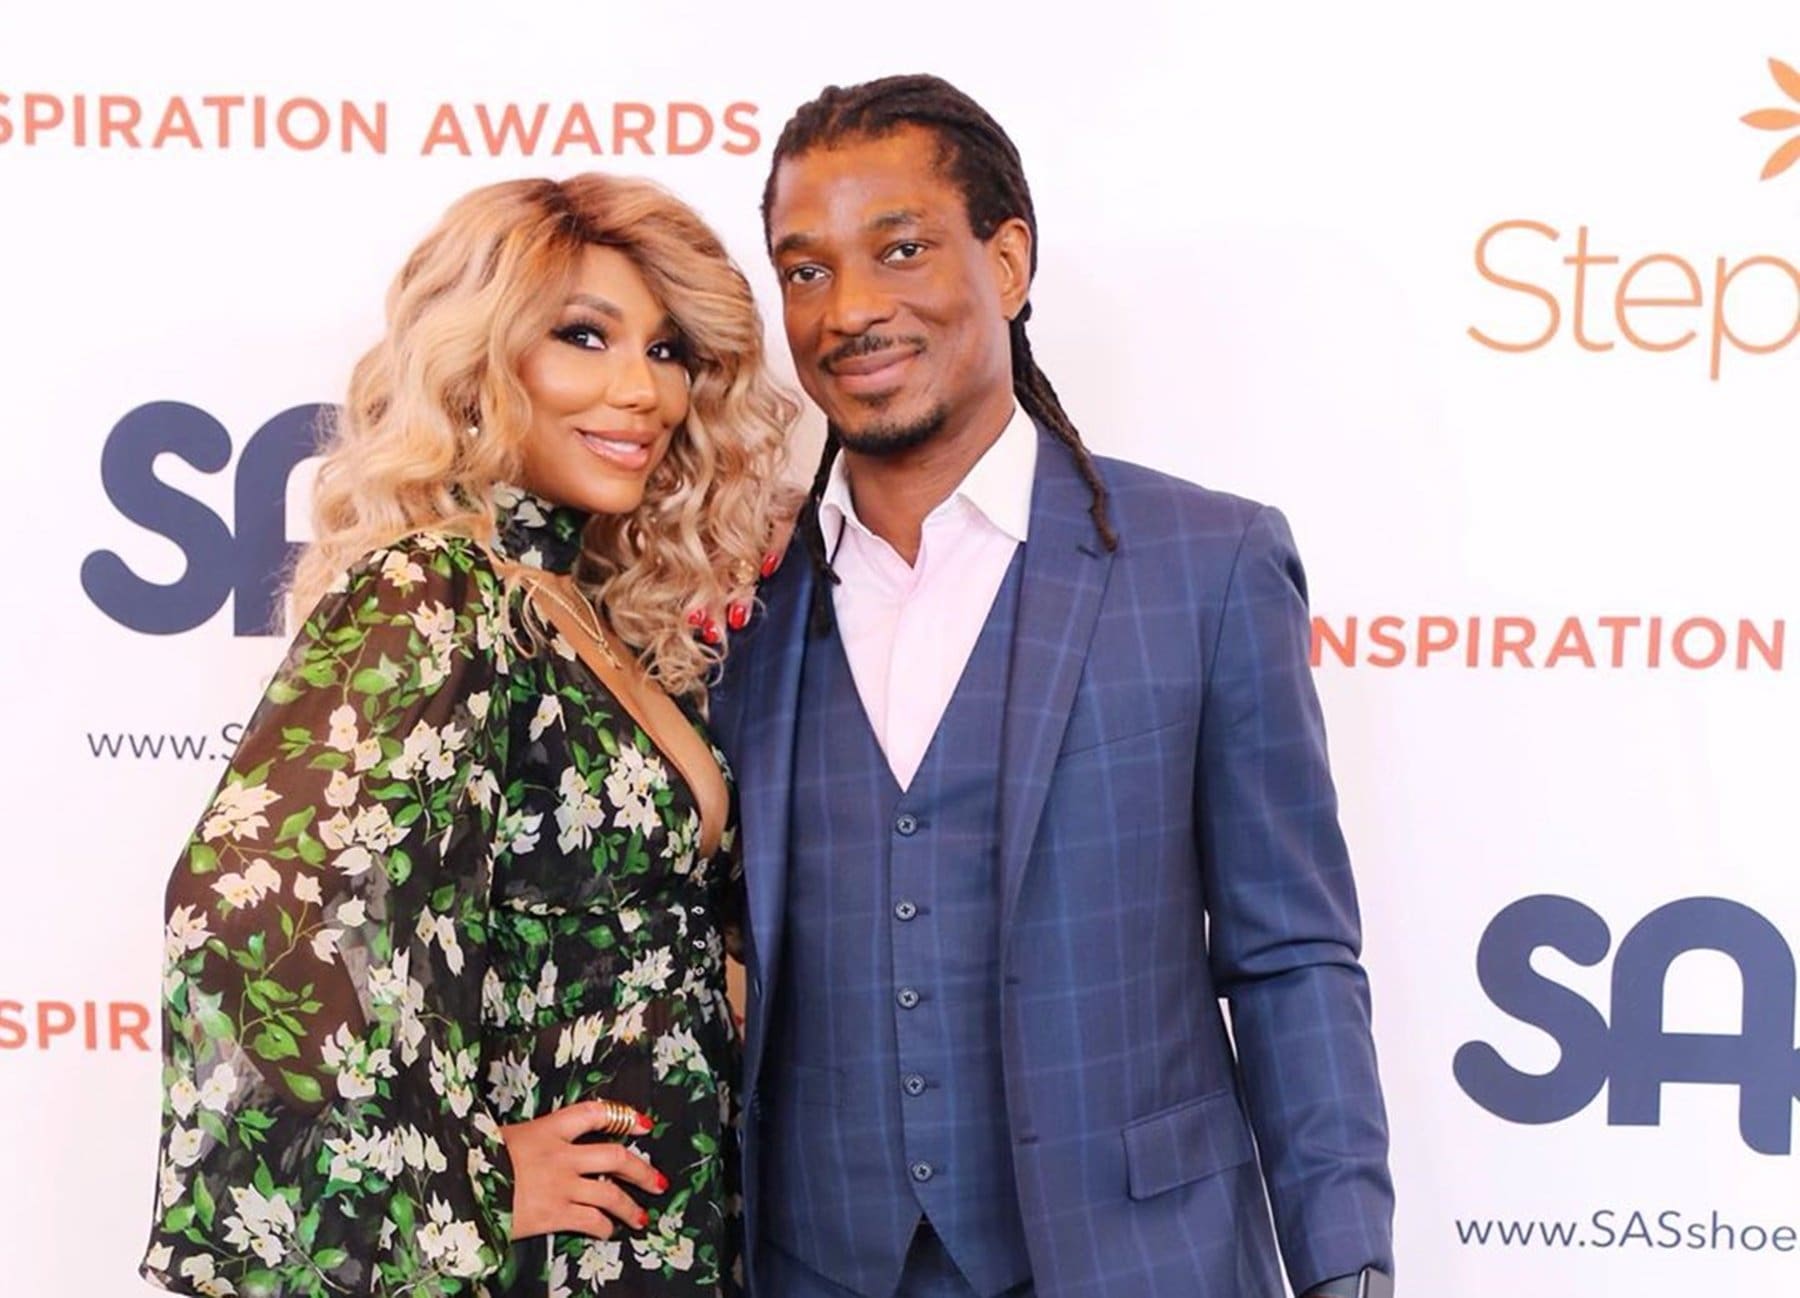 Tamar Braxton's BF, David Adefeso, Seems To Be Into Financial Coaching These Days